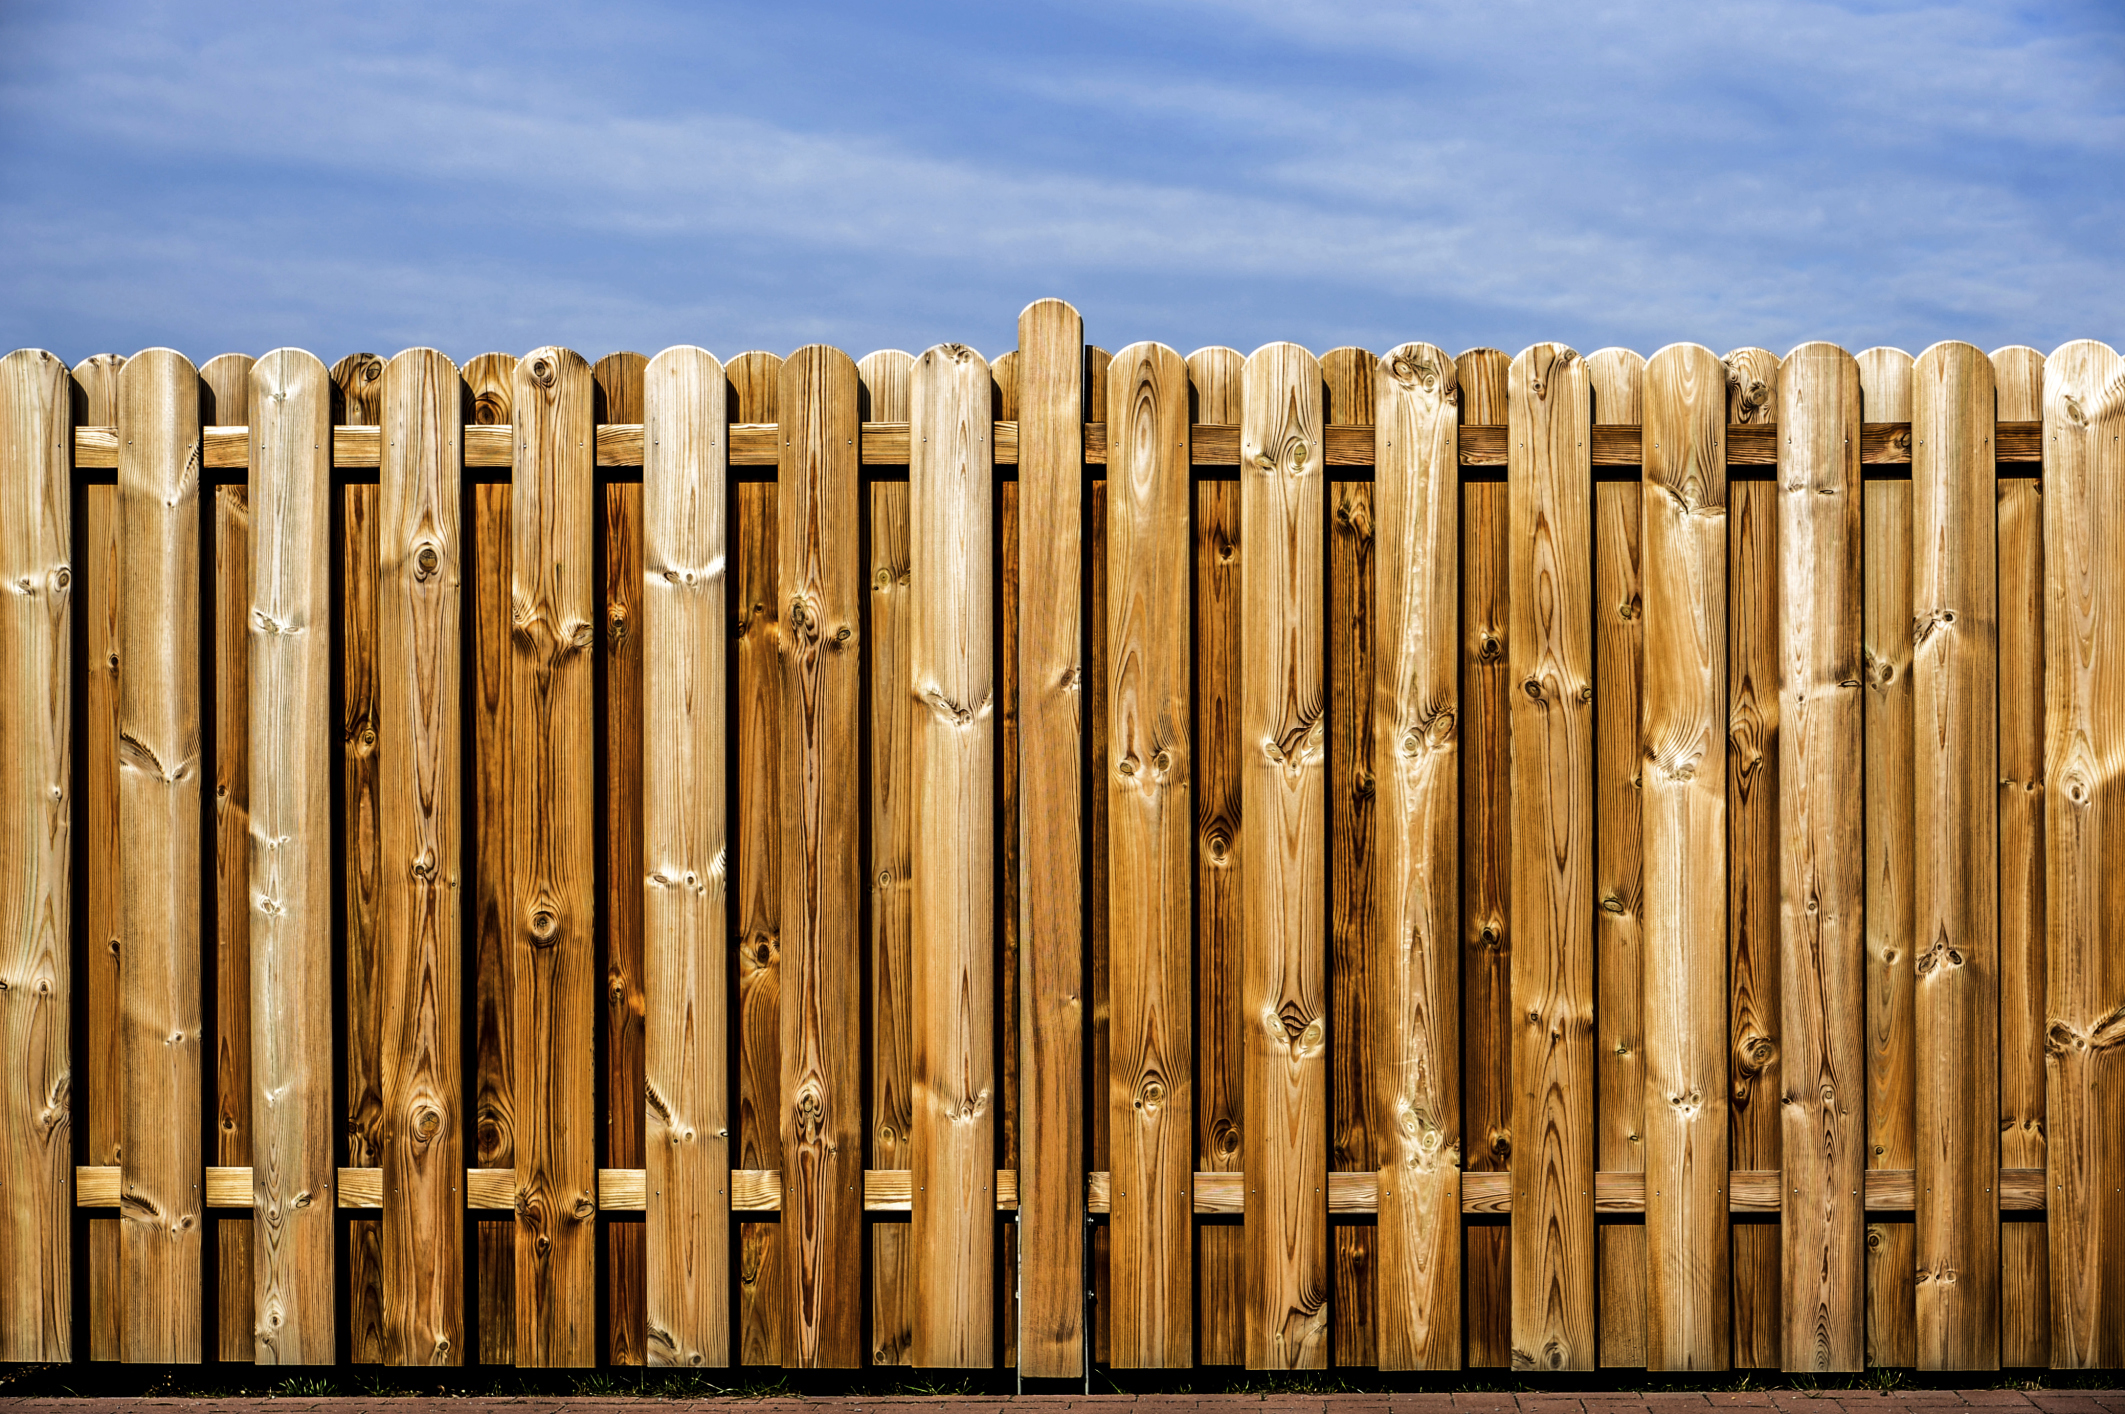 How to Protect Your Wood Fence From Termites - Hercules Fence Virginia